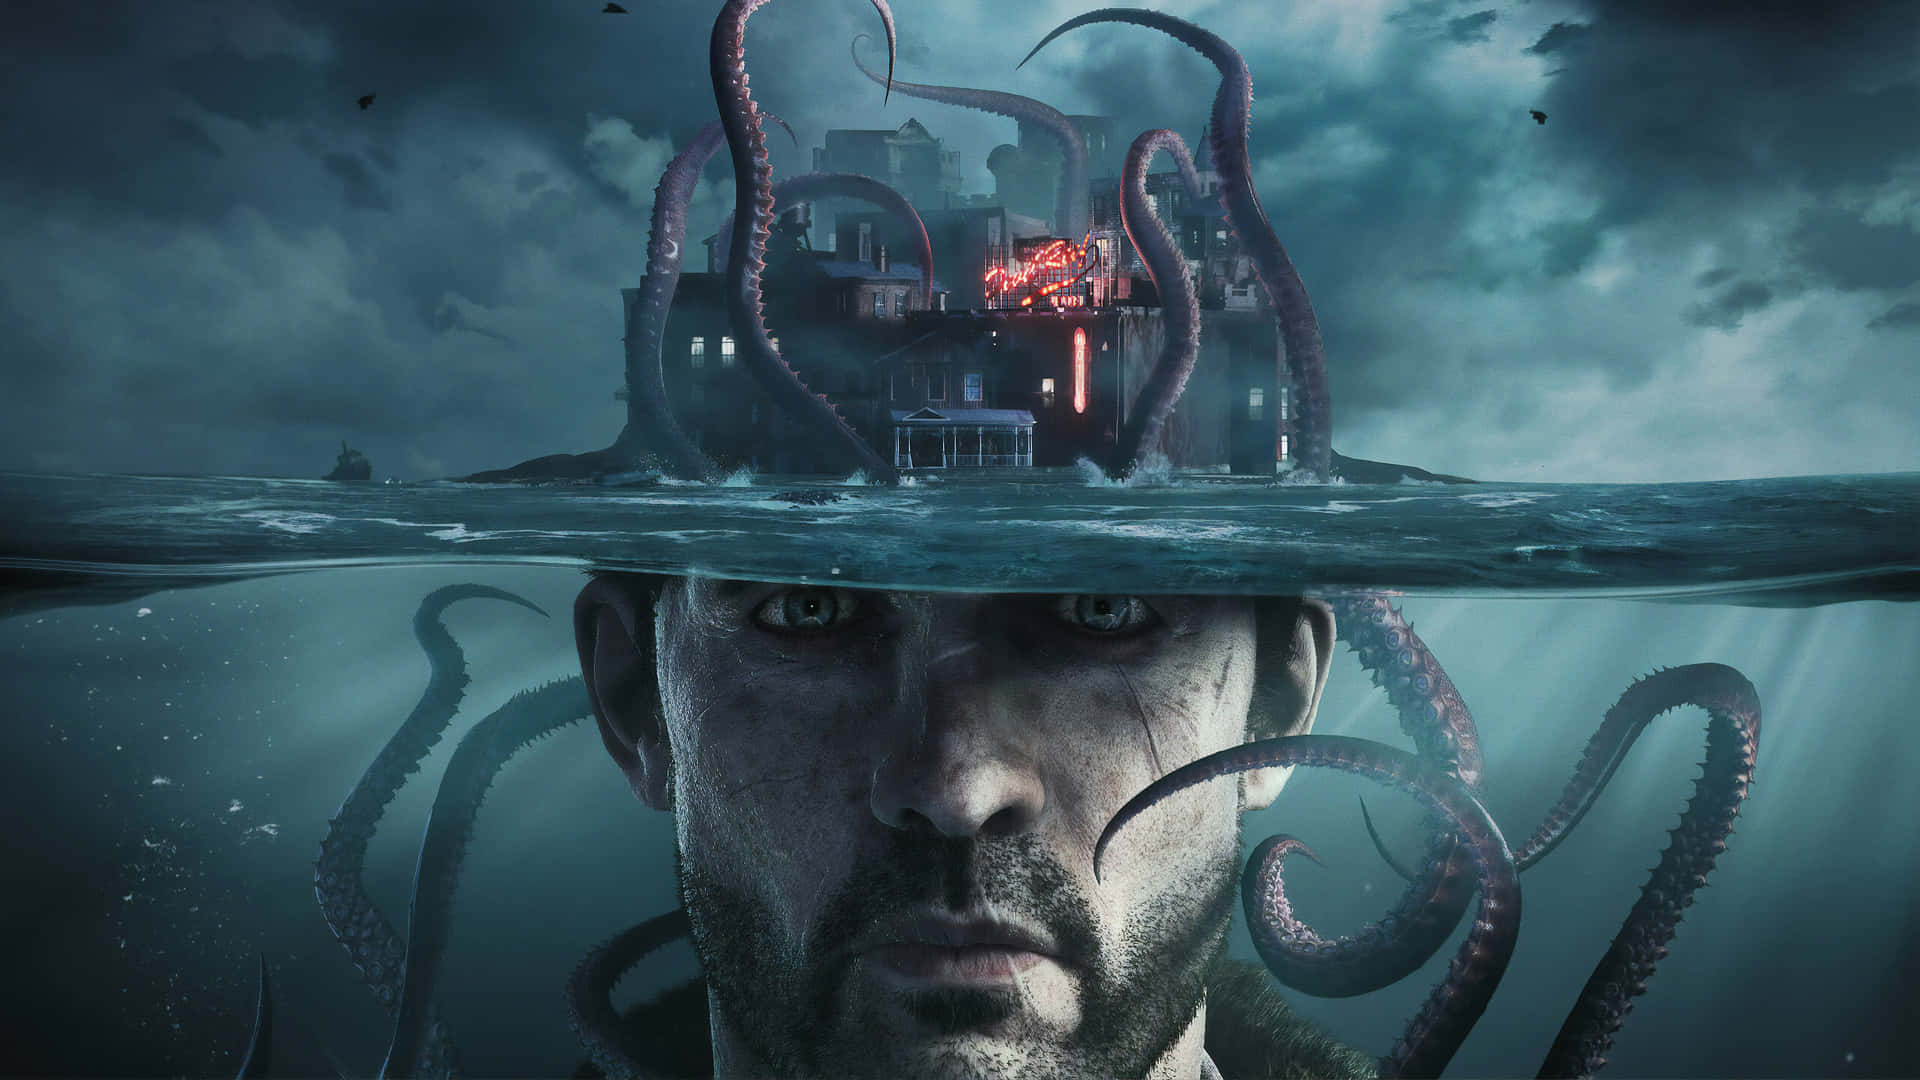 A Man With Tentacles On His Head Is In The Water Wallpaper